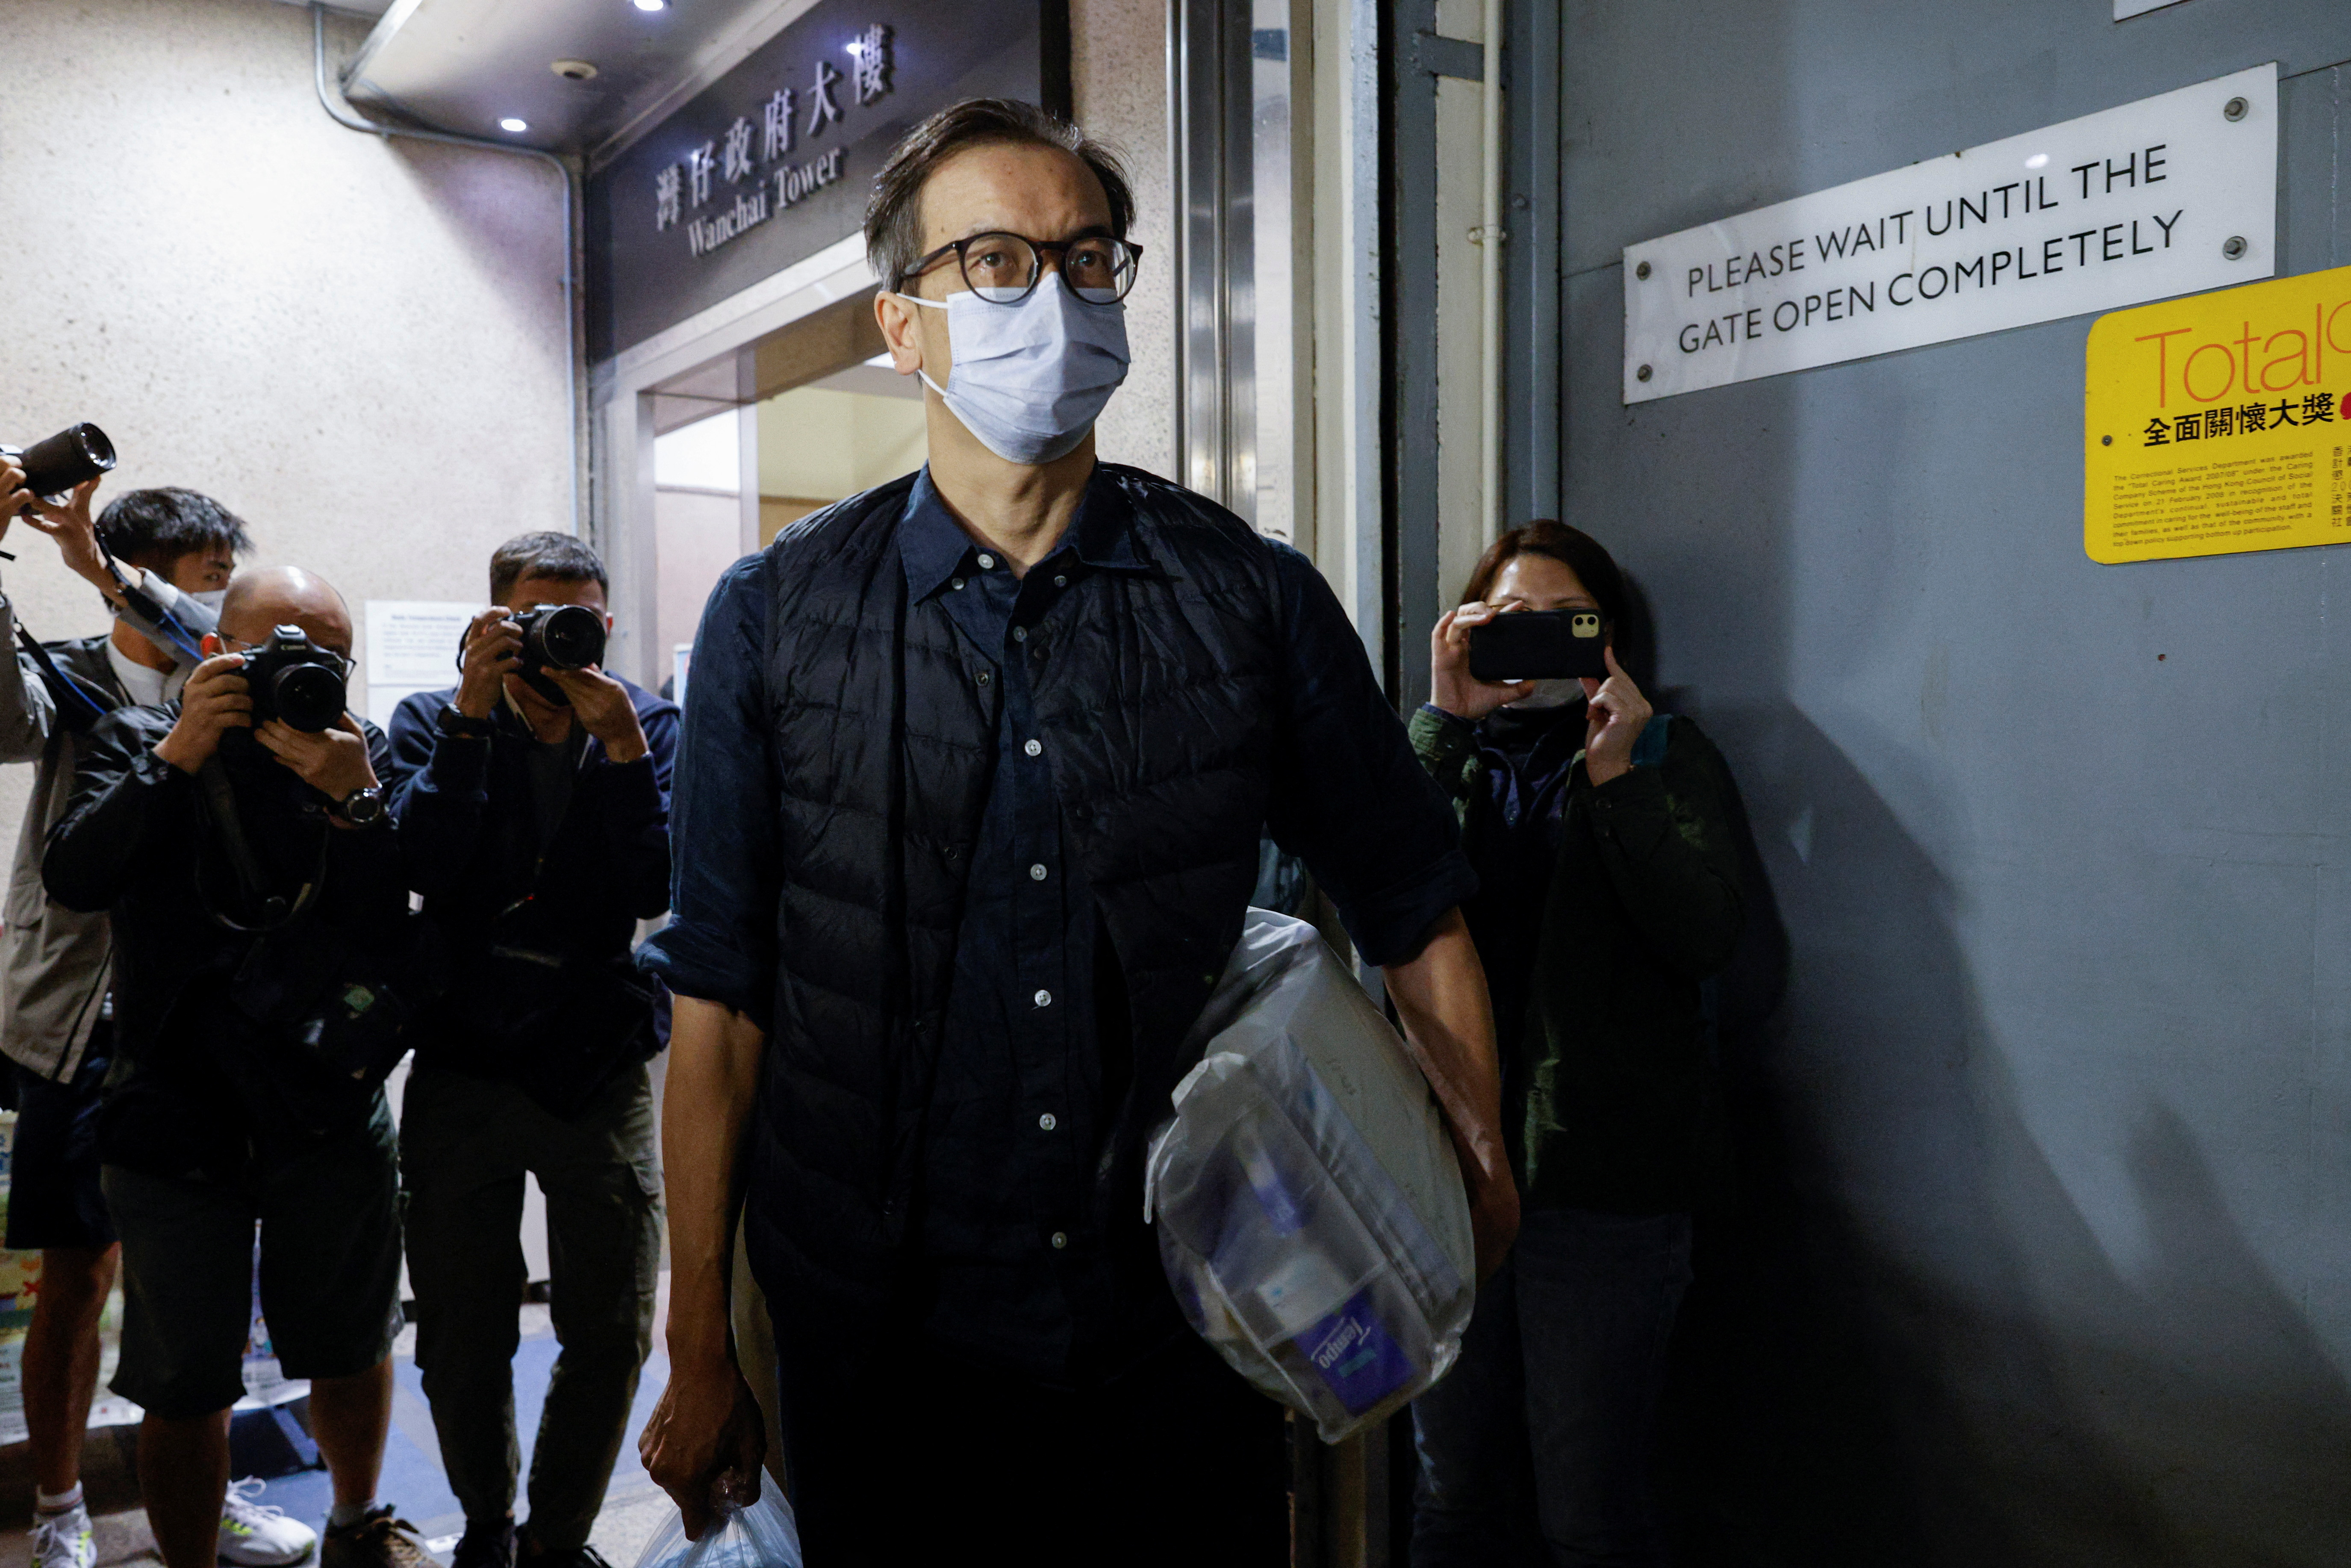 Former Stand News editor-in-chief Chung Pui-kuen leaves the court after release on bail over his charge of conspiring to publish "Seditious Publications" in Hong Kong